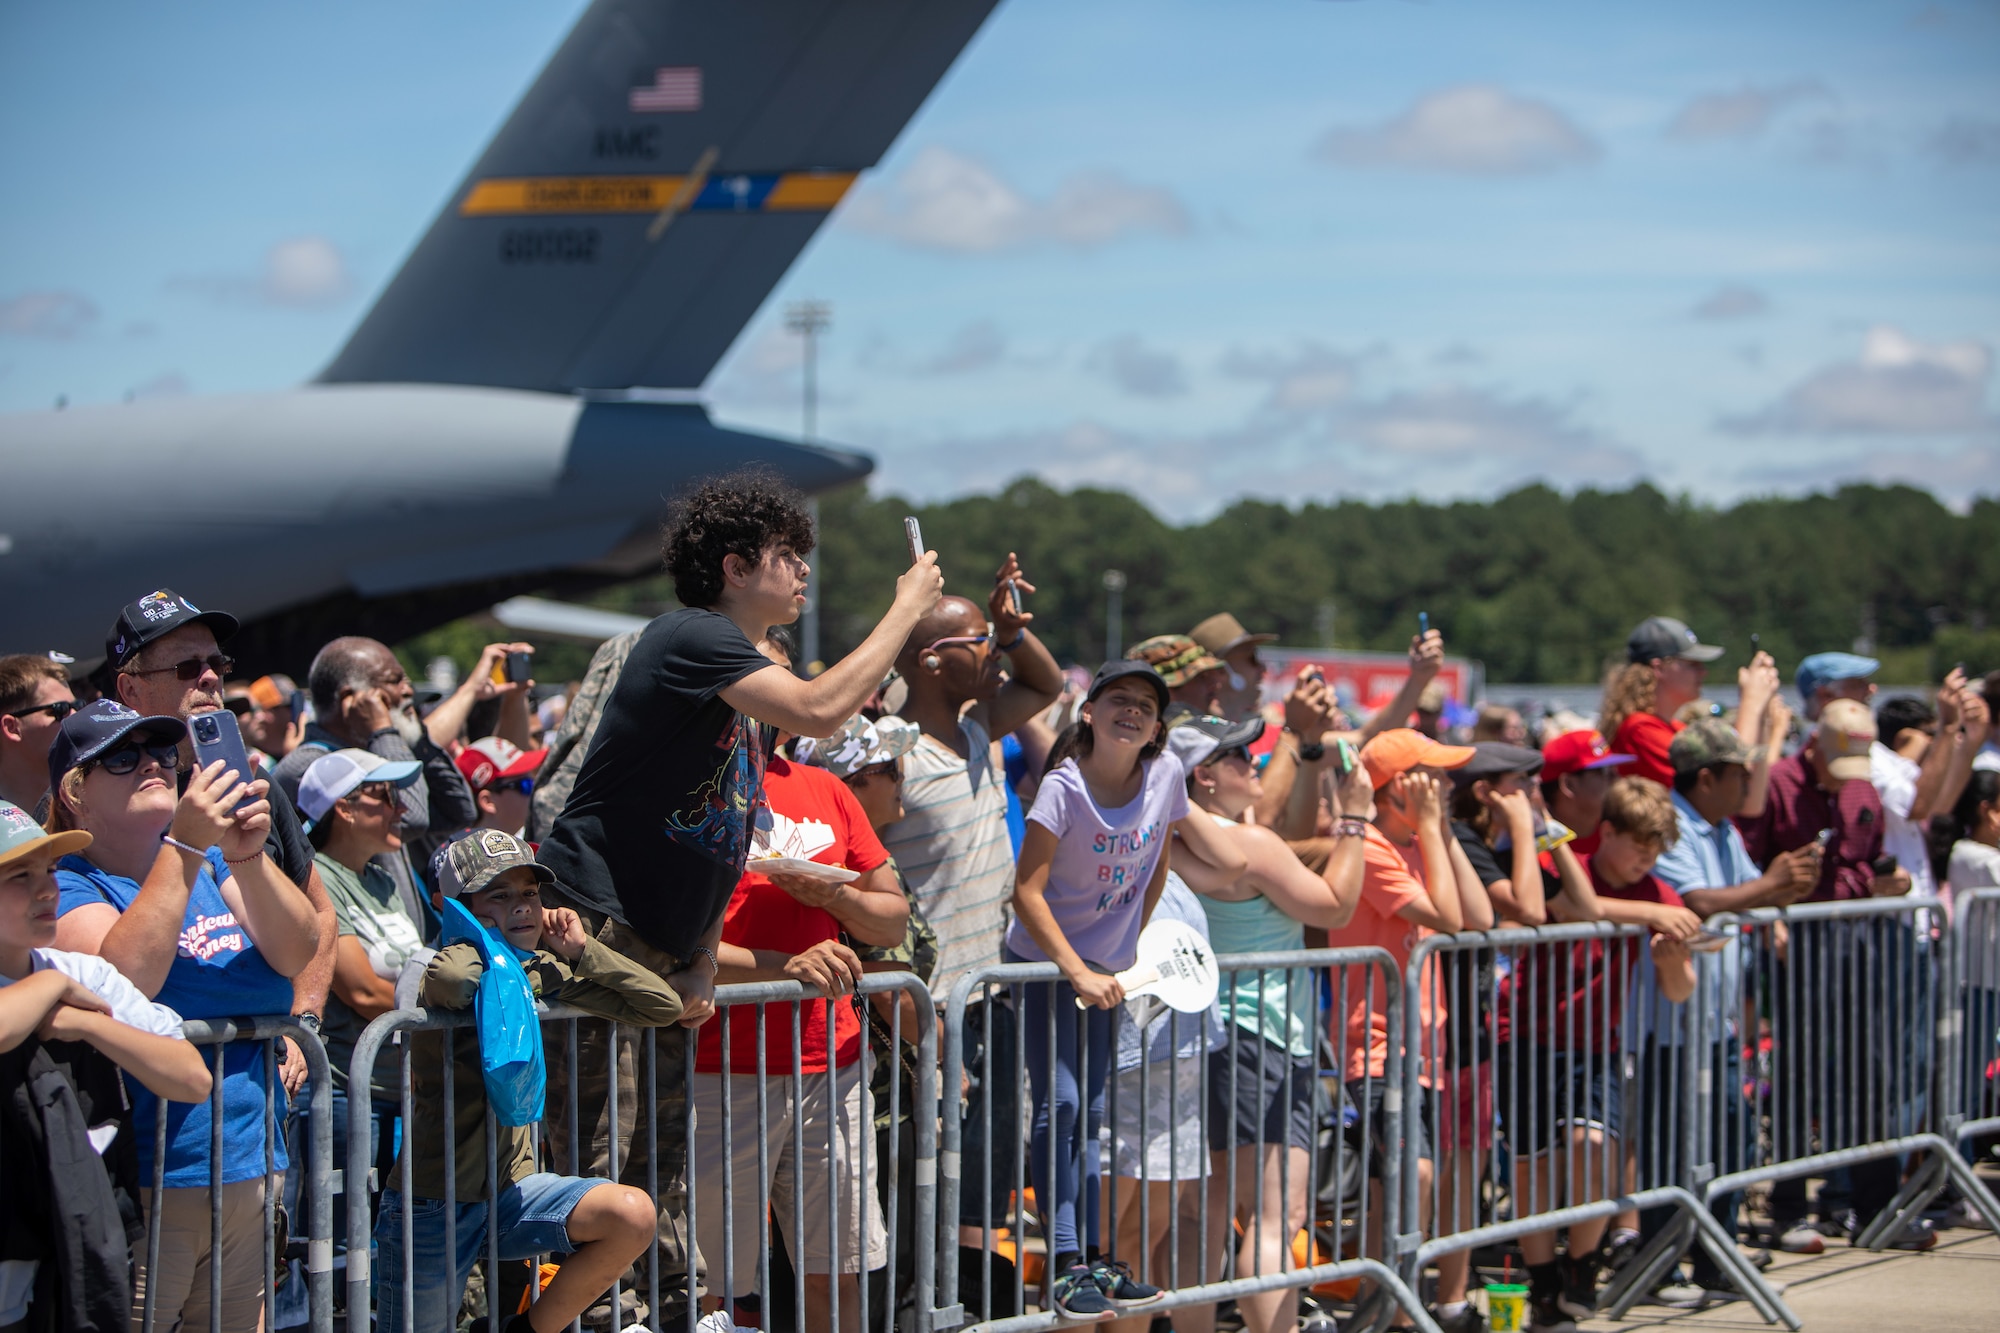 Spectators watch as various aircraft perform aerial manuevers during the 2023 Wings Over Wayne air show at Seymour Johnson Air Force Base, North Carolina, May 20, 2023. Wings Over Wayne provides an opportunity for North Carolina residents and visitors from around the world to see how SJAFB builds to the future of airpower and displays a history of aircraft innovation and capabilities. (U.S. Air Force photo by Staff Sgt. Koby I. Saunders)